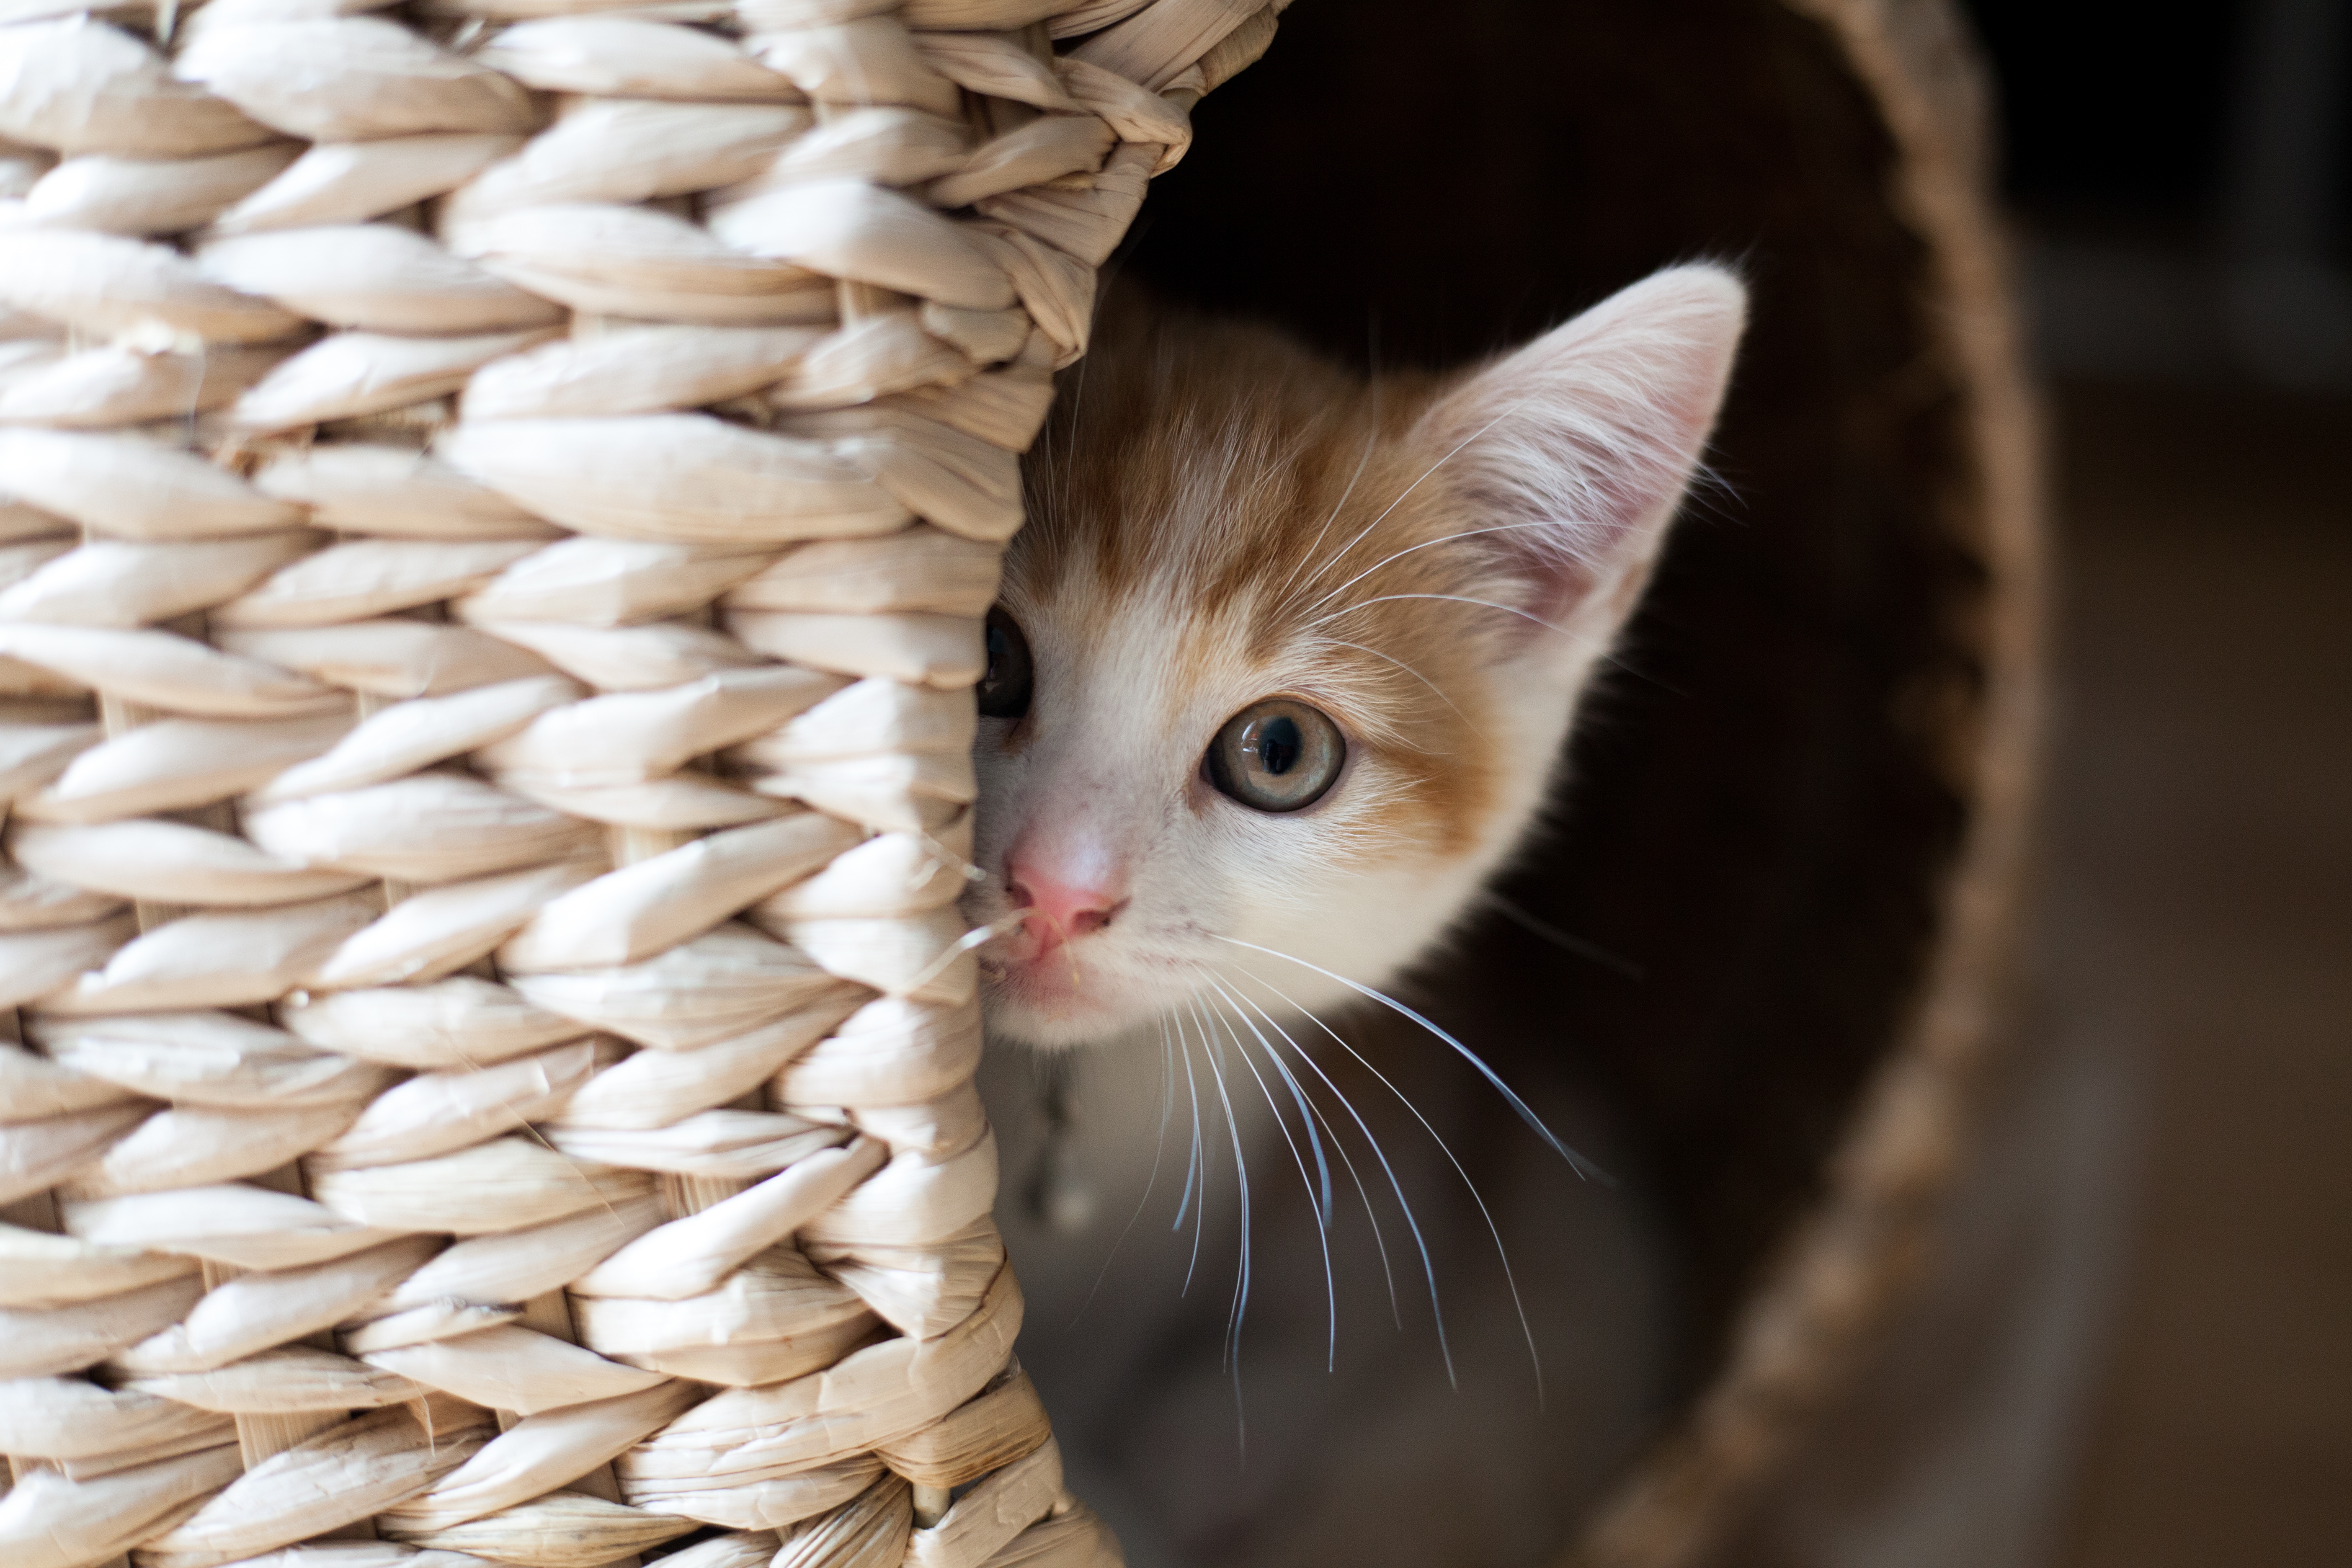 cat hiding in basket meowing